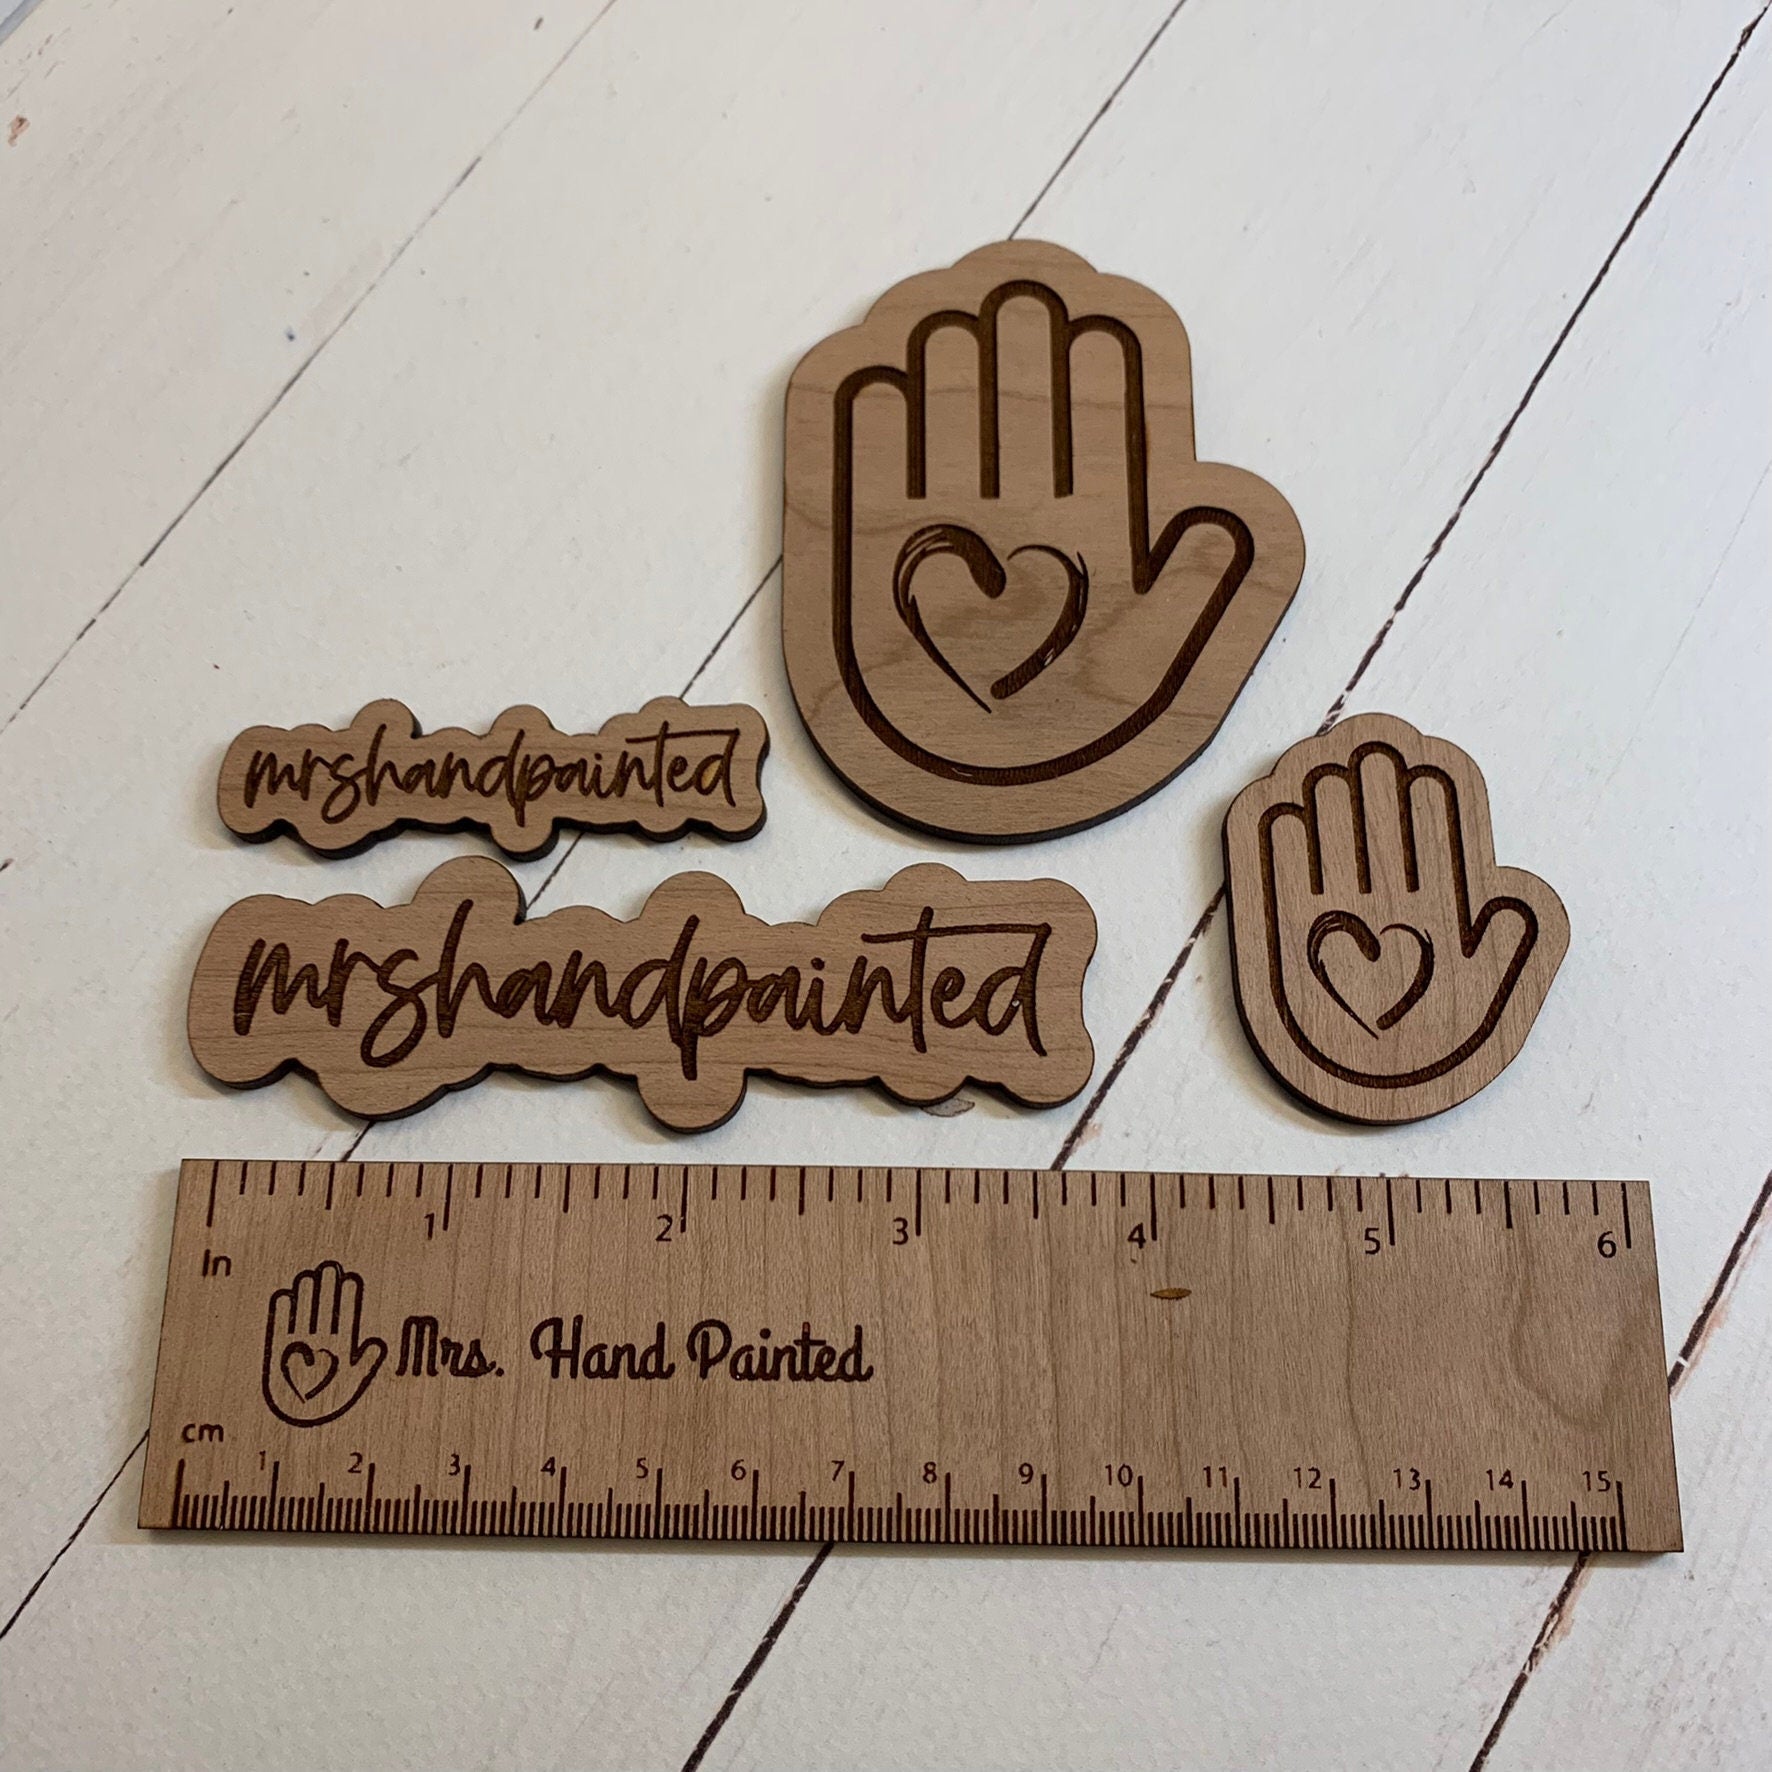 Custom Logo Branding Accessories, Laser Cut Logo Pieces, Rulers and Photo Flay Lay Props